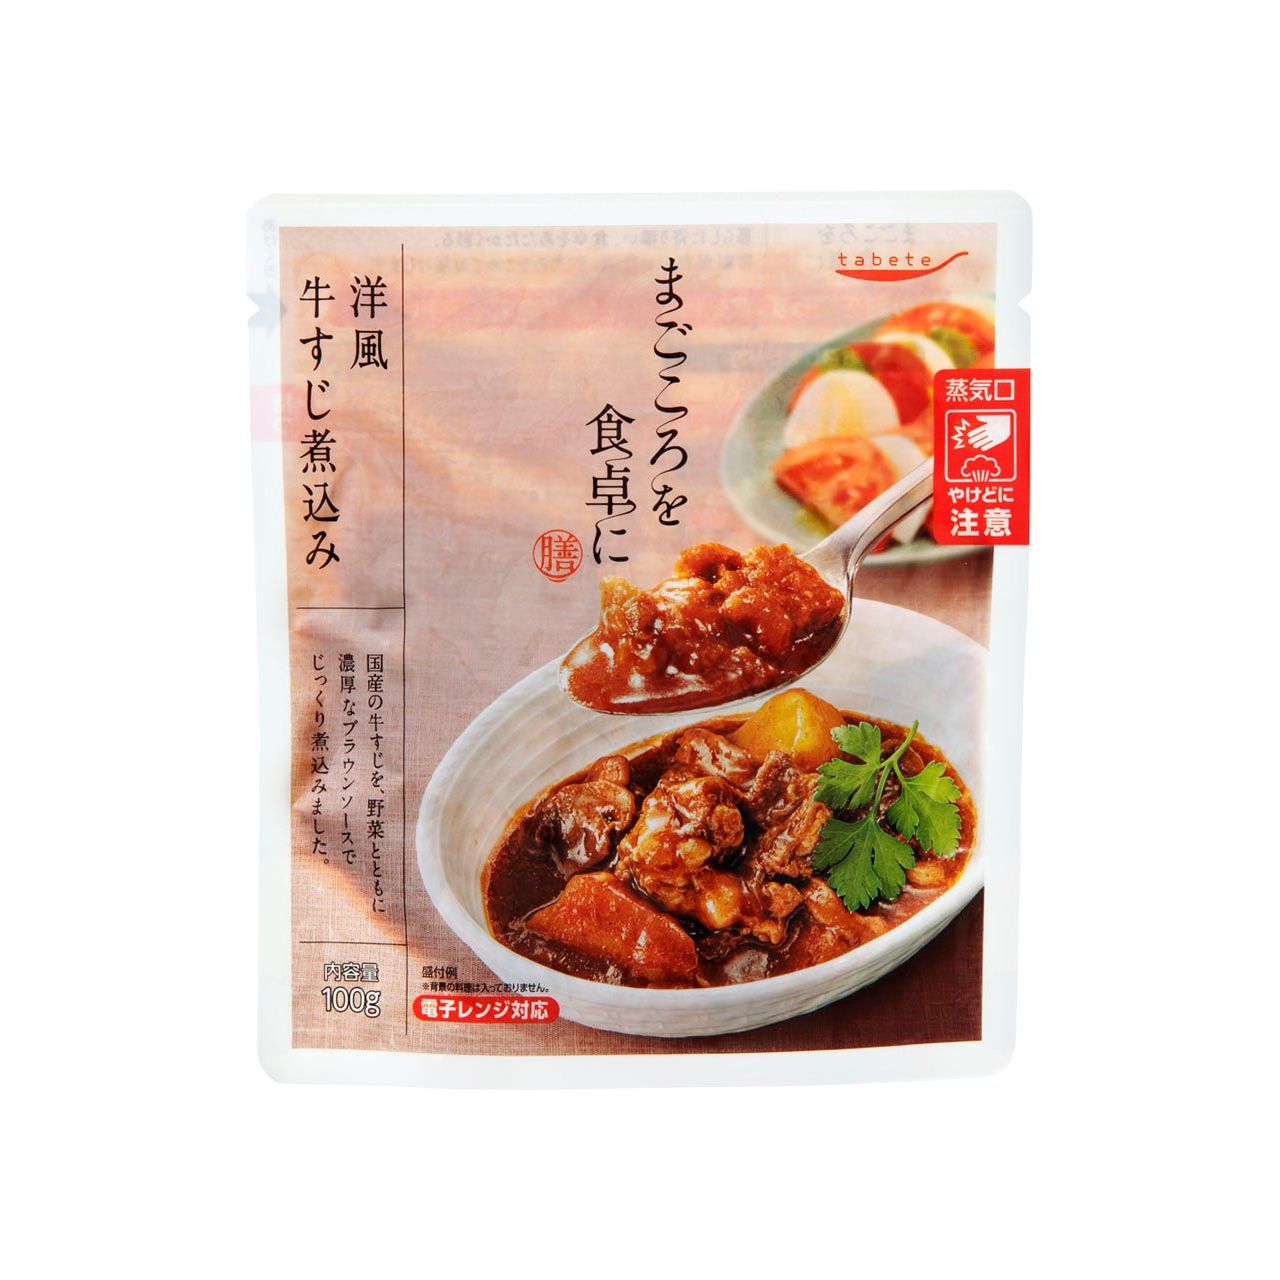 tabete まごころを食卓に 膳 洋風牛すじ煮込み - ROJI日本橋 ONLINE STORE